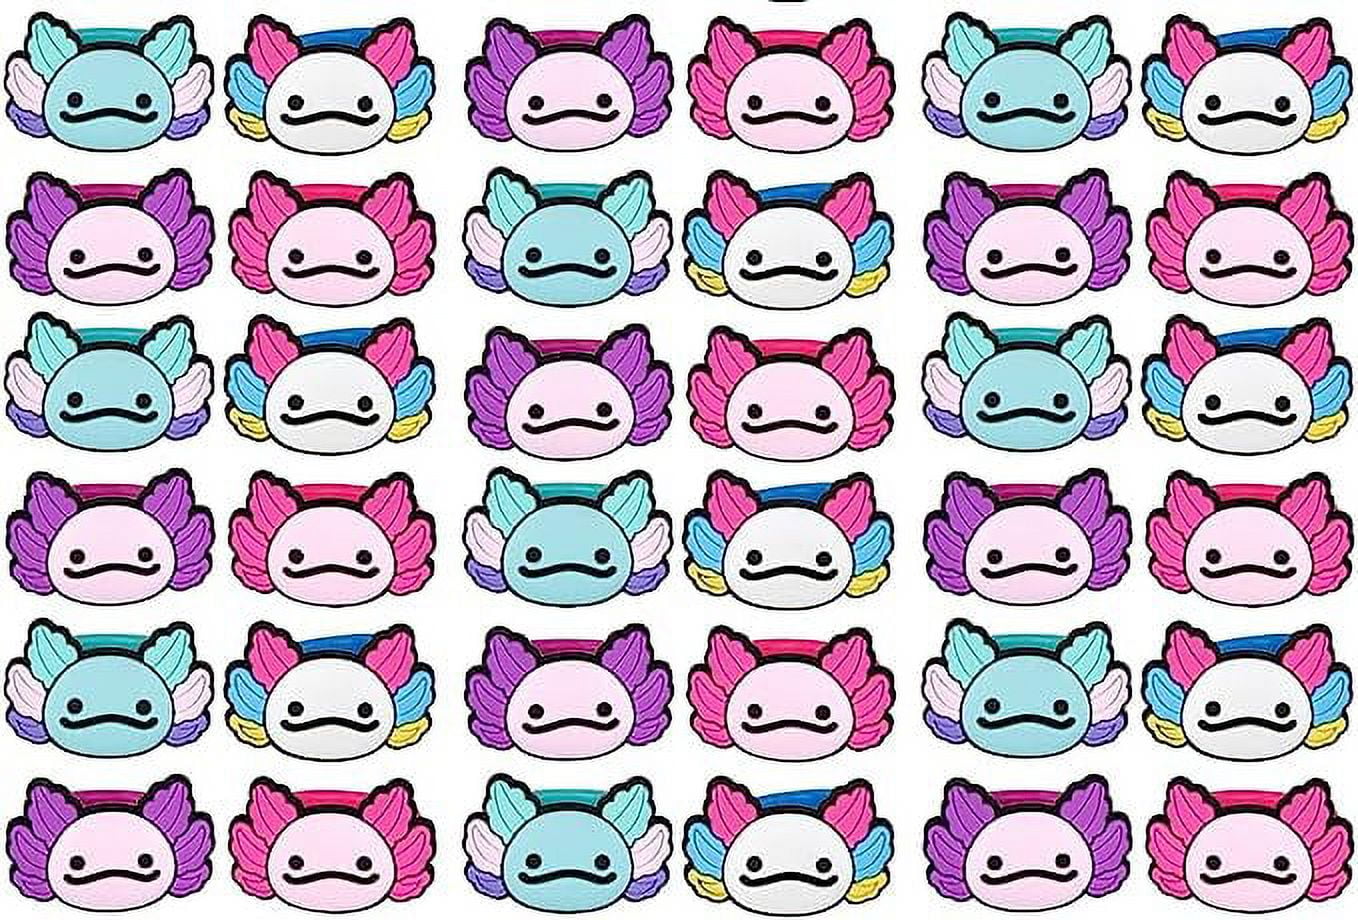 Axolotl Rings - Cute Plastic Charms Jewelry for Children - Ring Kids Party Favors 1 Random Color Ring